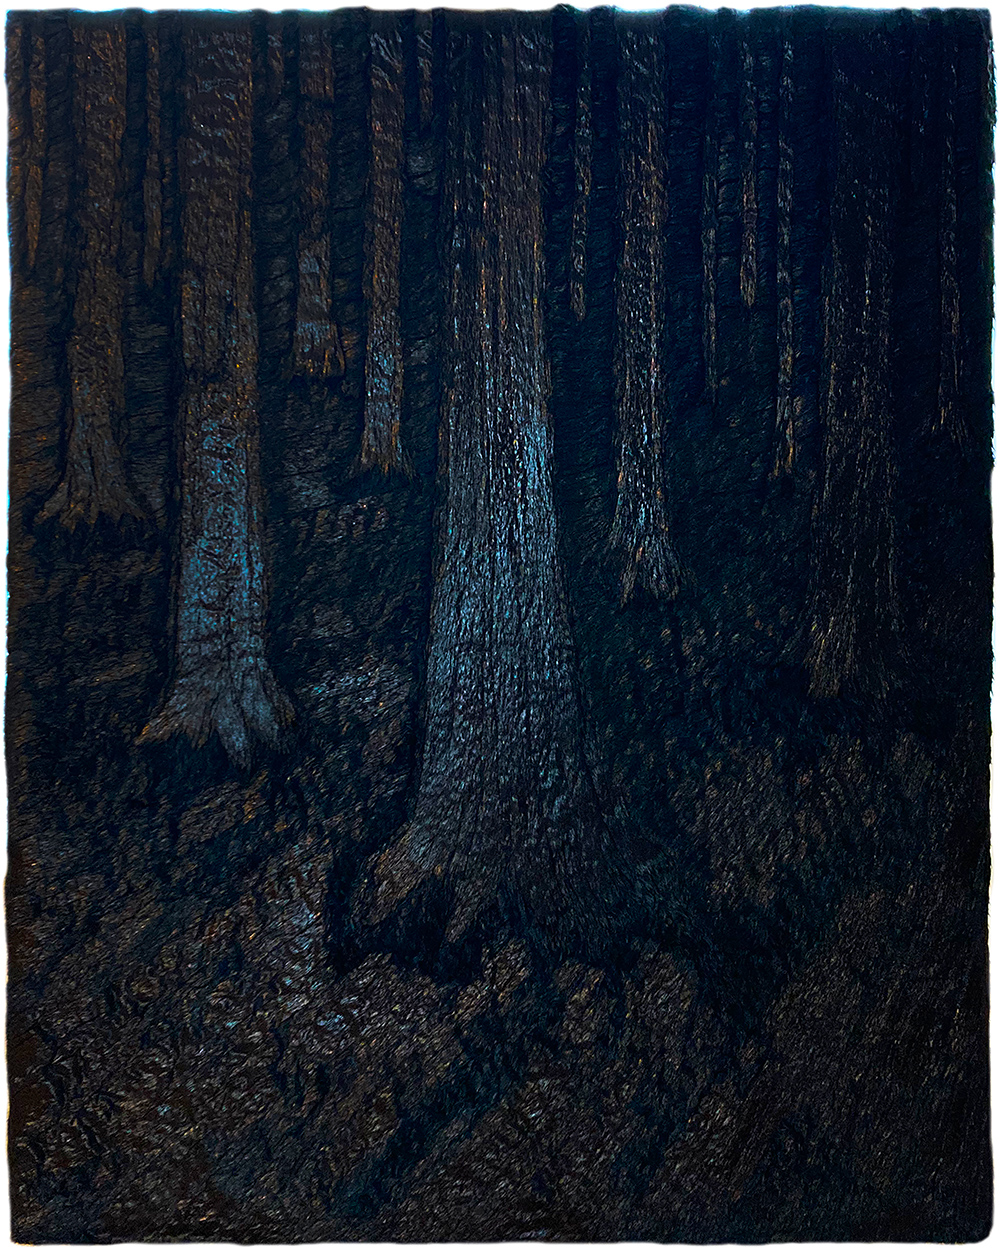 Forest, a painting by Guido Vrolix